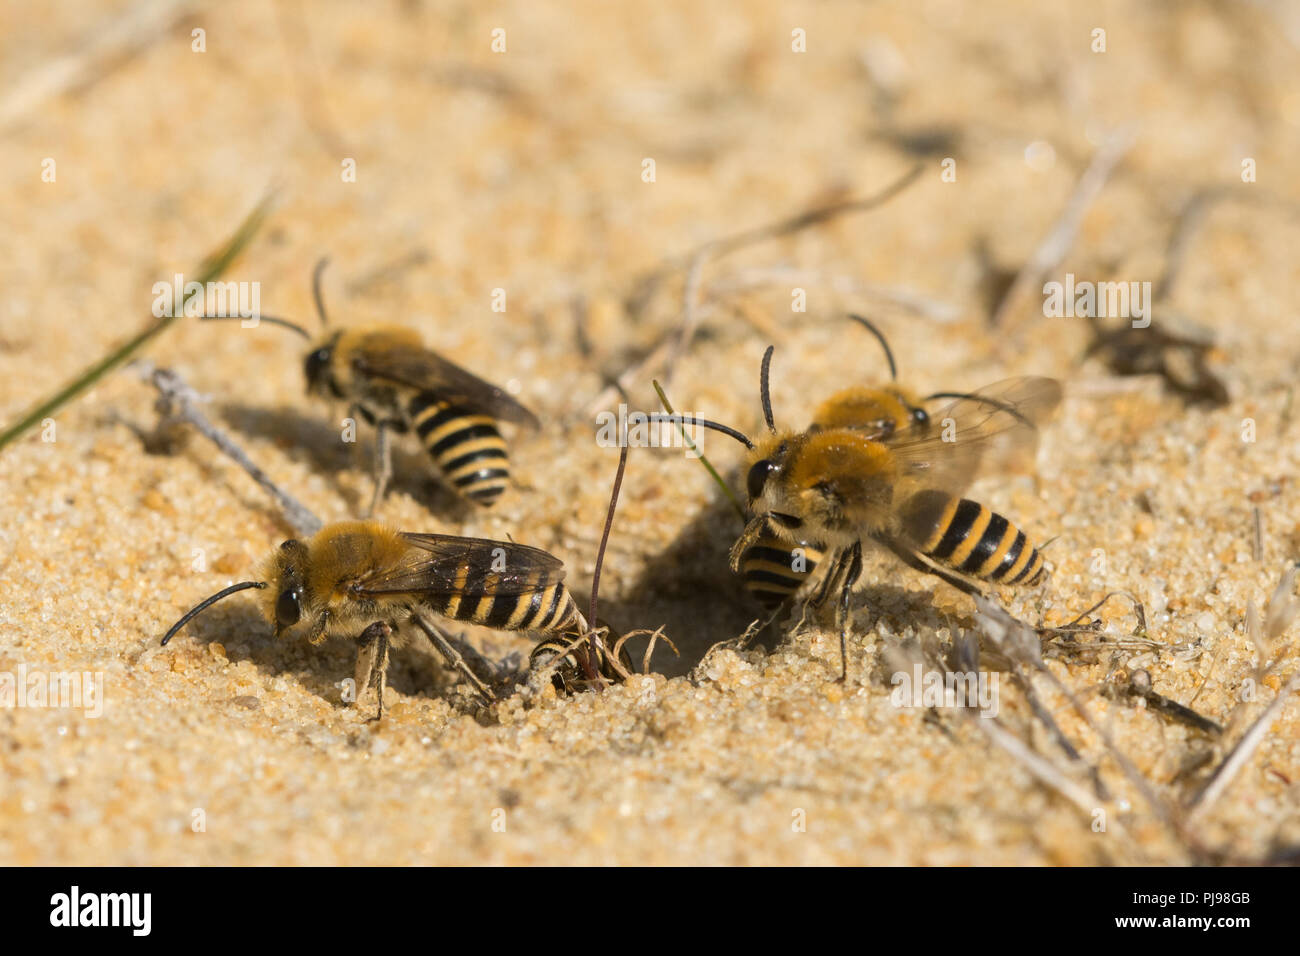 Ivy bees (Colletes hederae), a species first seen in the British Isles in 2001, around burrows in sand in Hampshire, UK Stock Photo